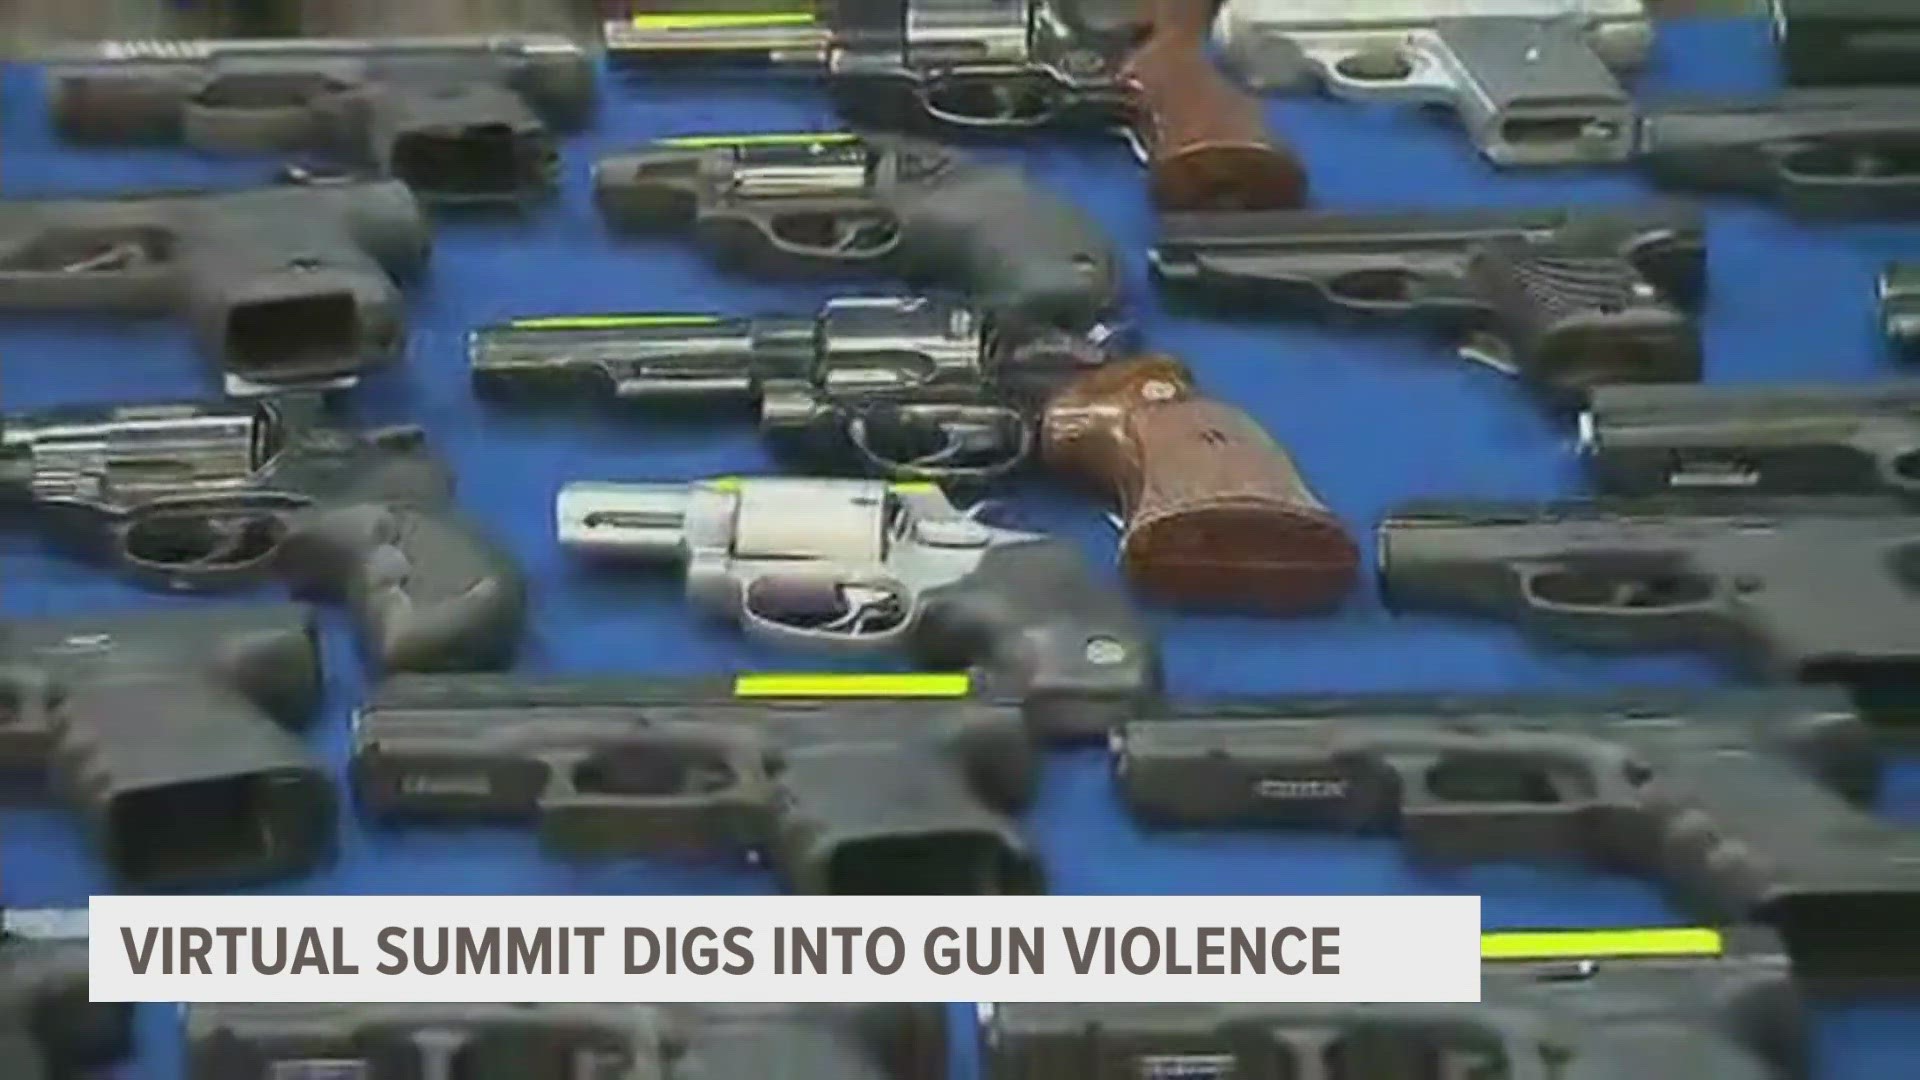 A virtual summit to discuss gun violence and changes to laws was held.